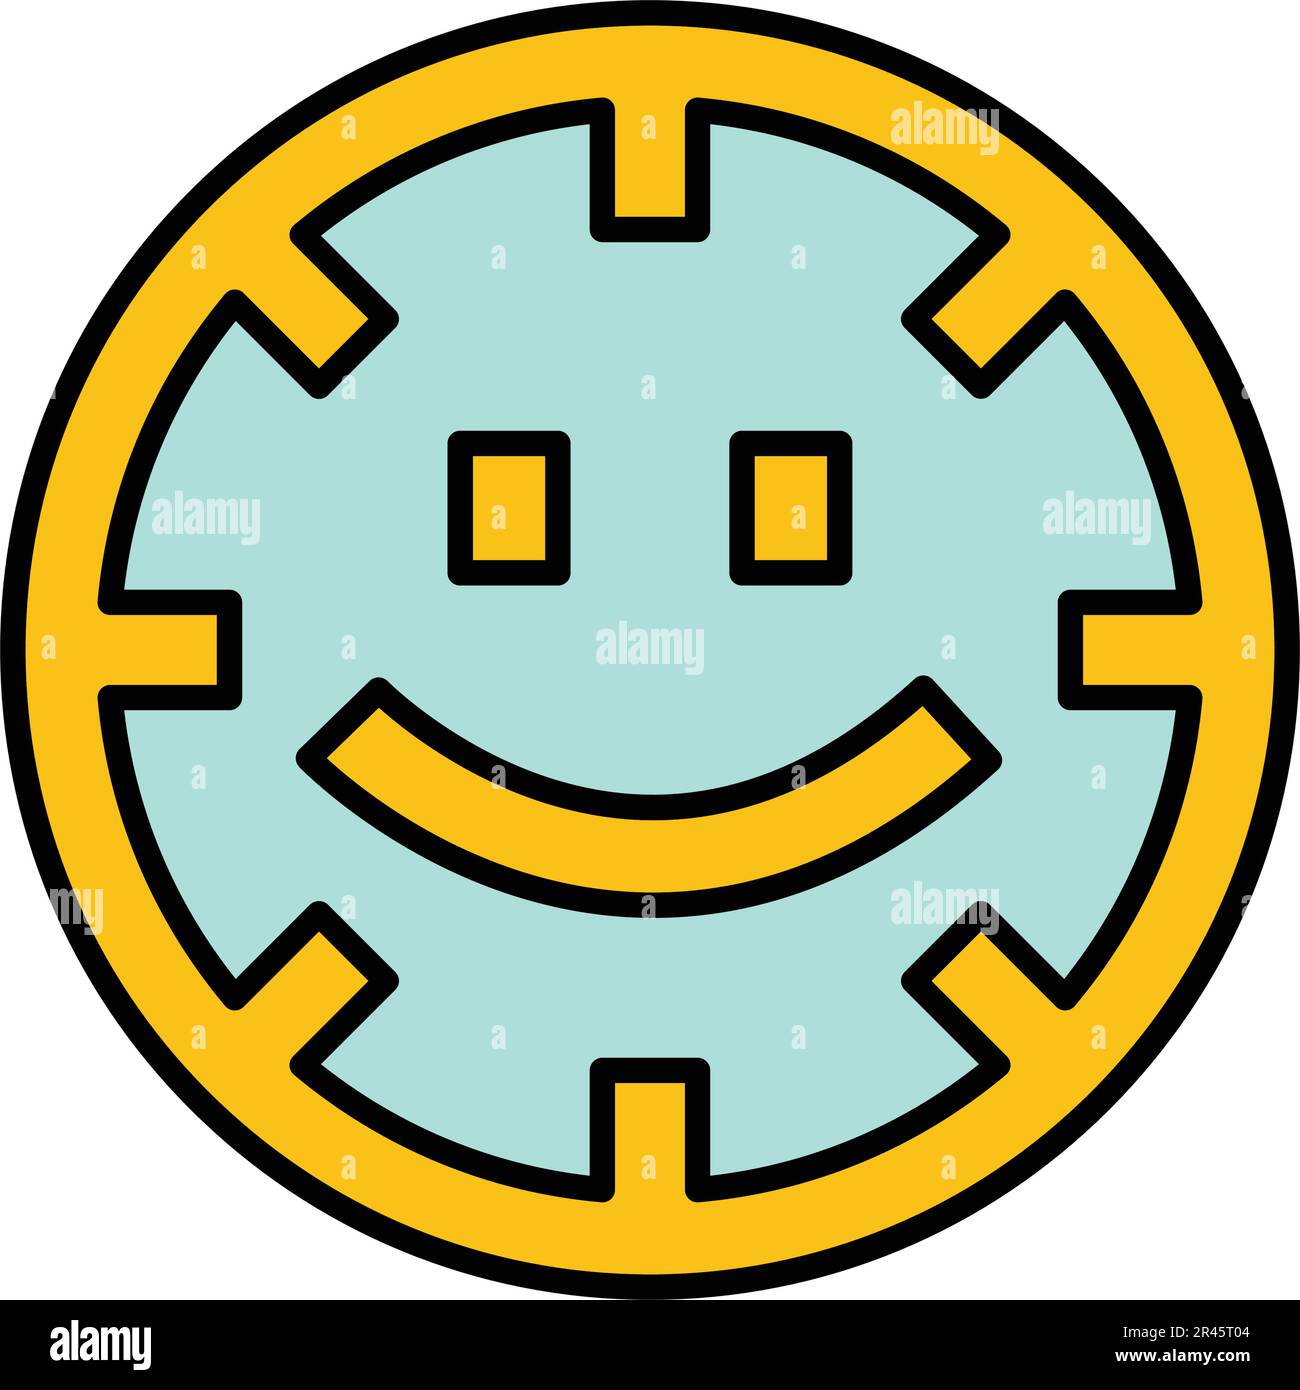 Happy, happy hour, smile, time icon.. Use for designing and developing websites, commercial purposes, print media, web or any type of design task. Stock Vector